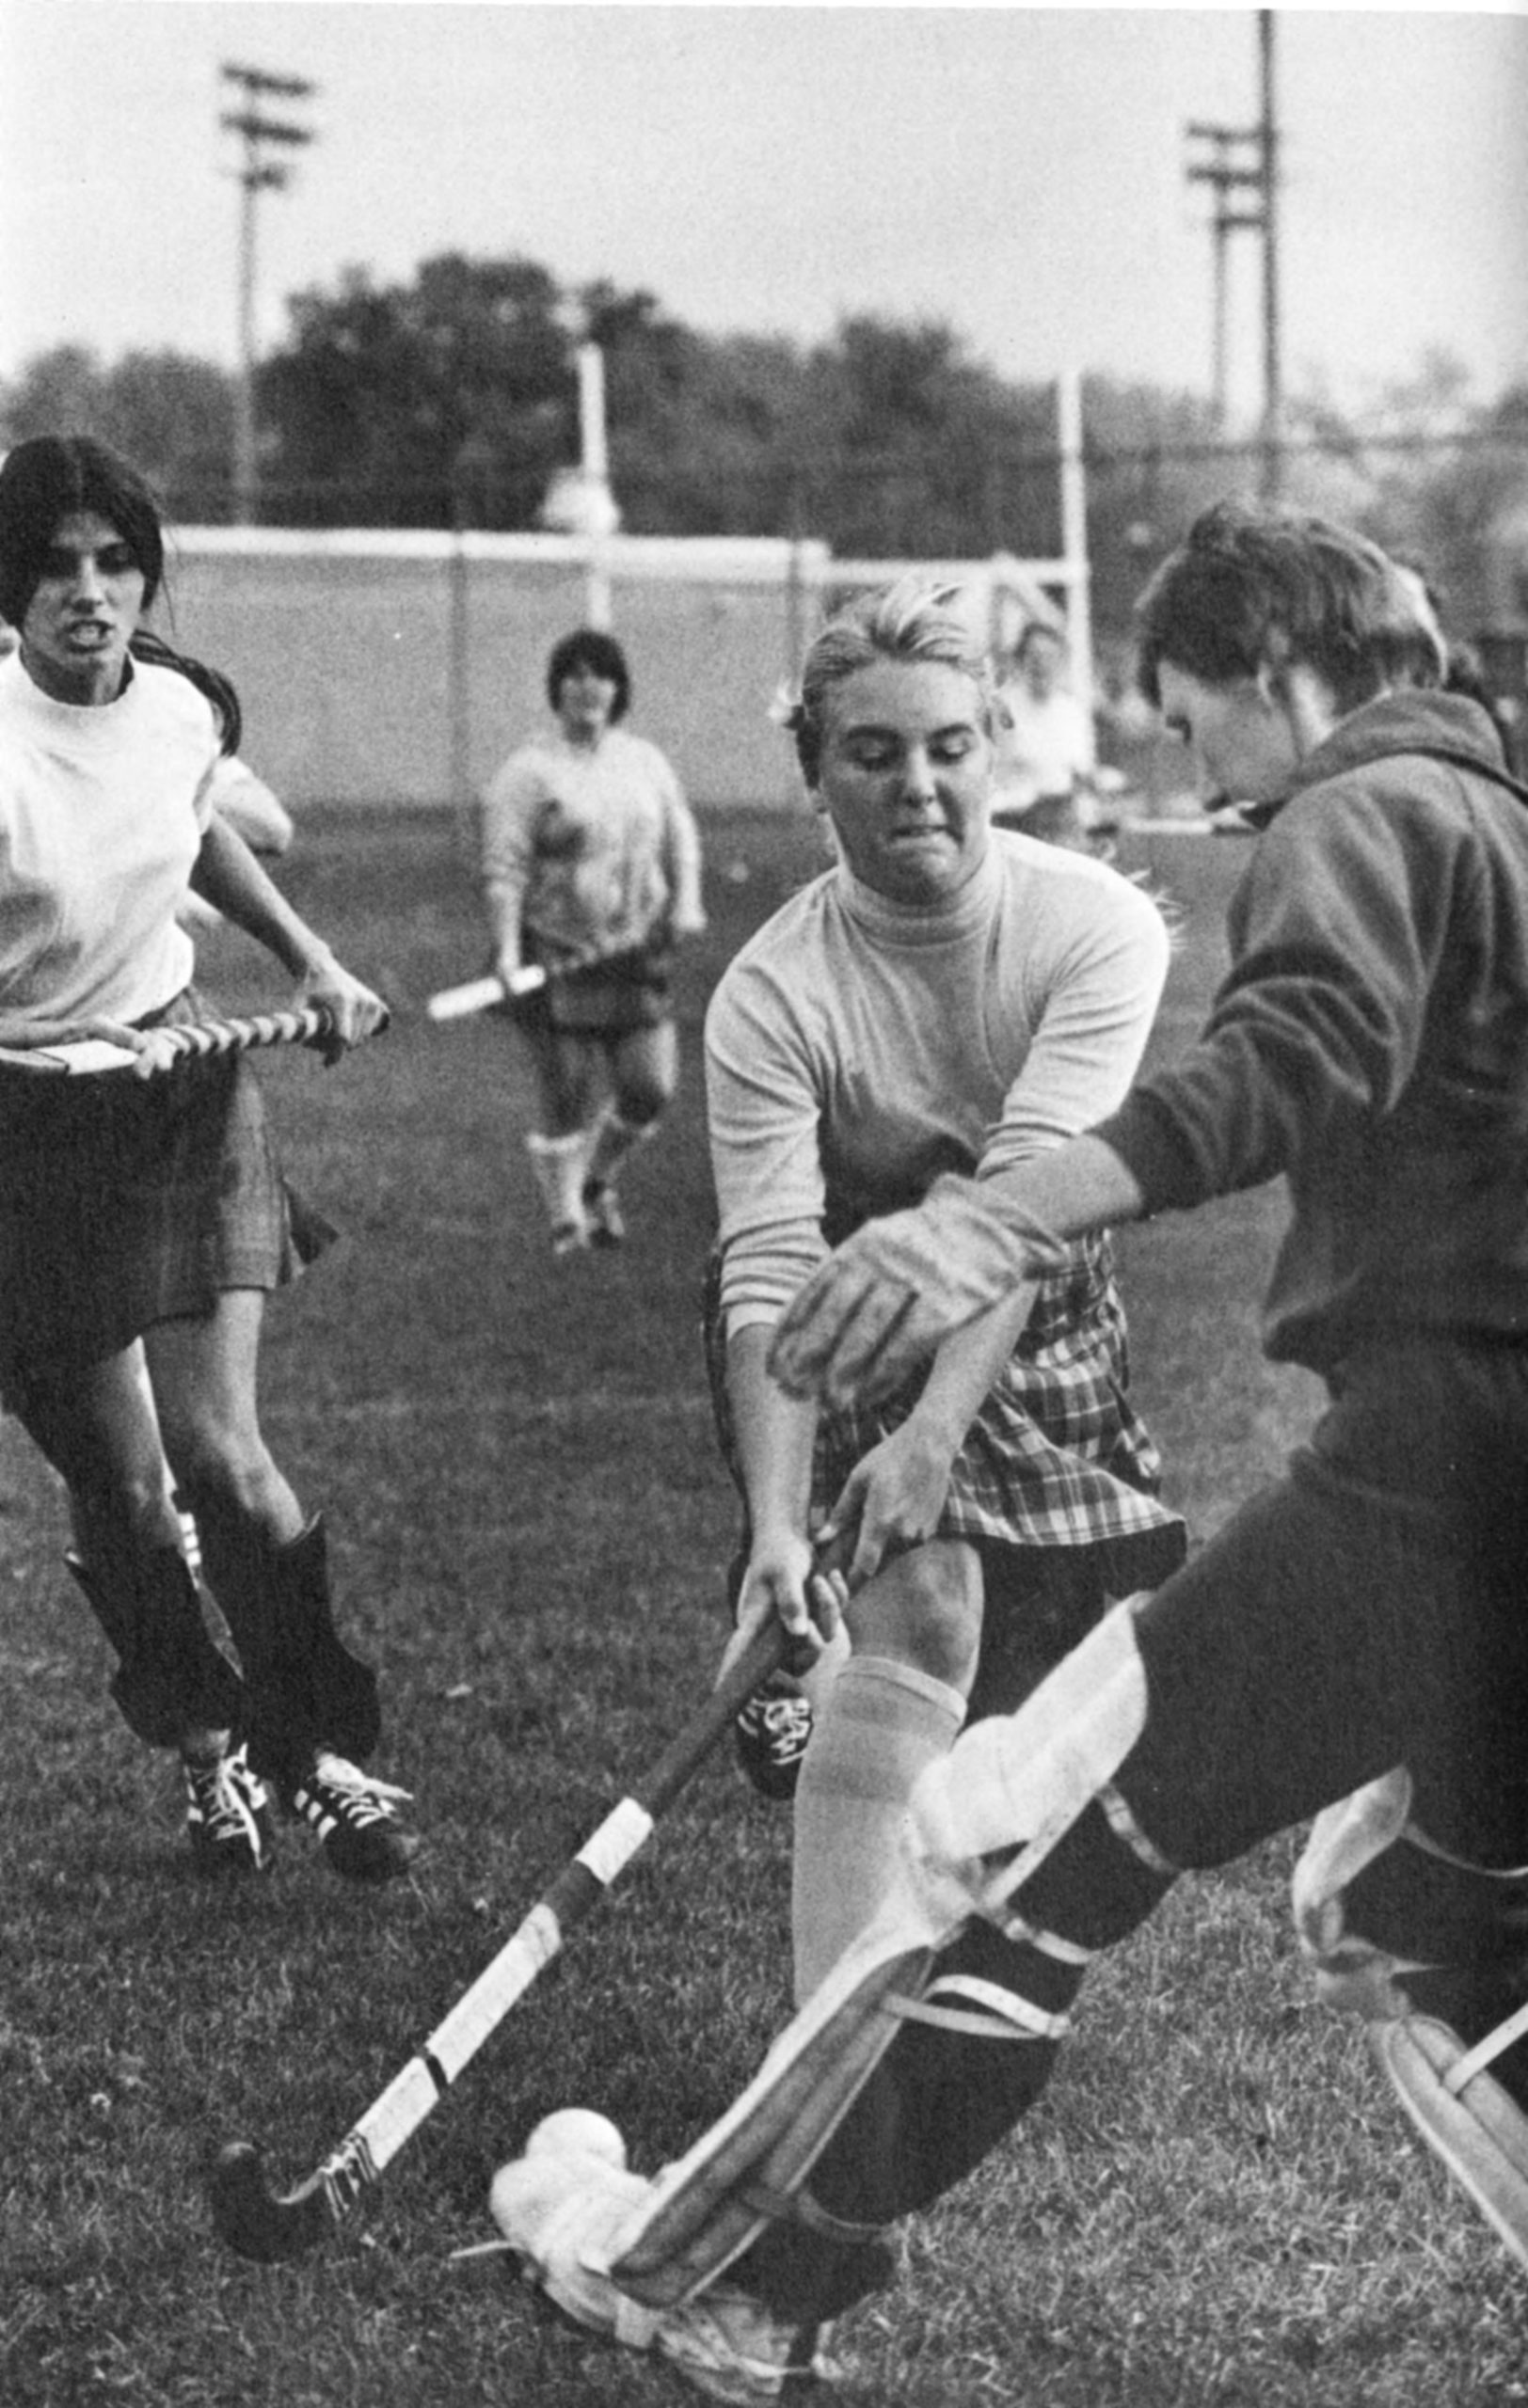 From 1975, four girls playing field hockey at U-M